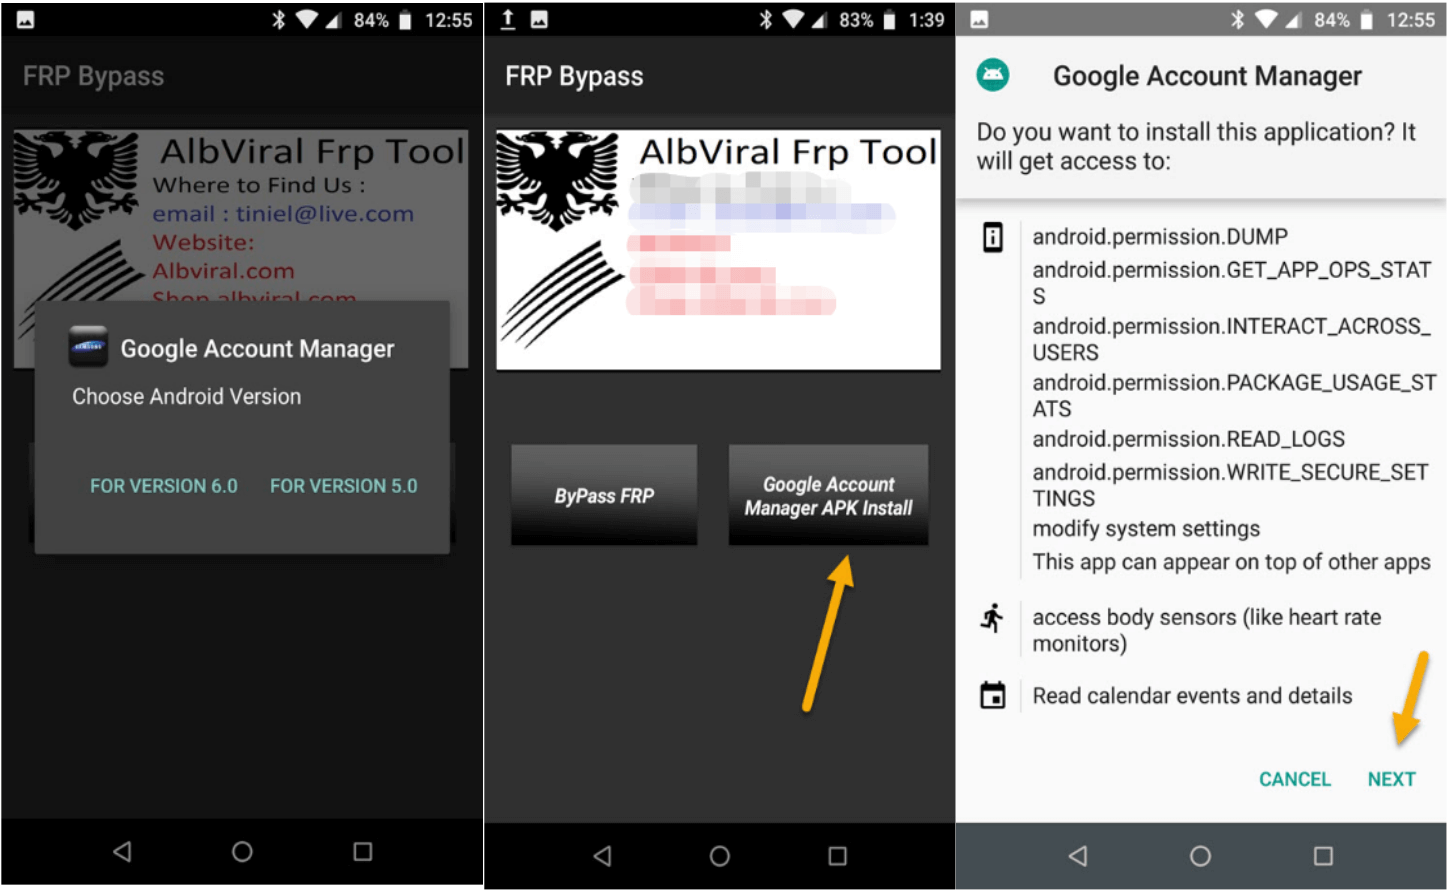 download and install Google account manager APK